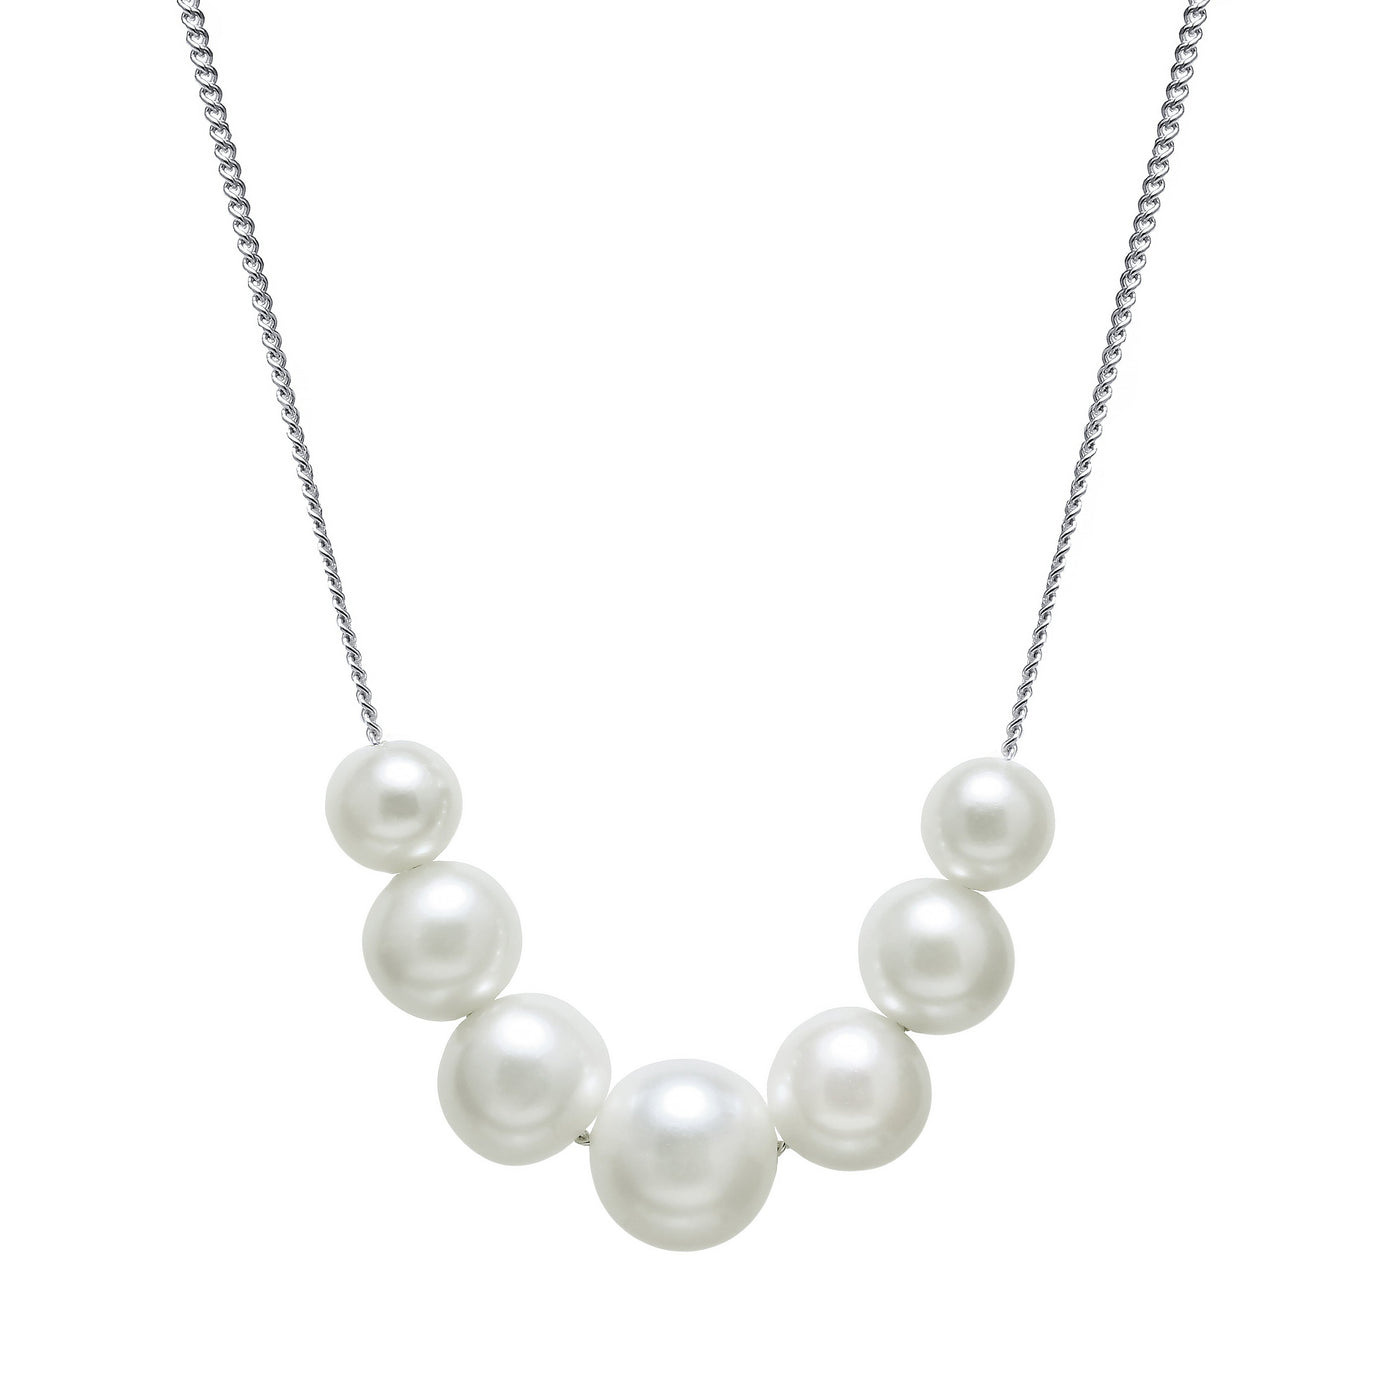 Graduated White Cultured Pearl Sterling Silver Necklace